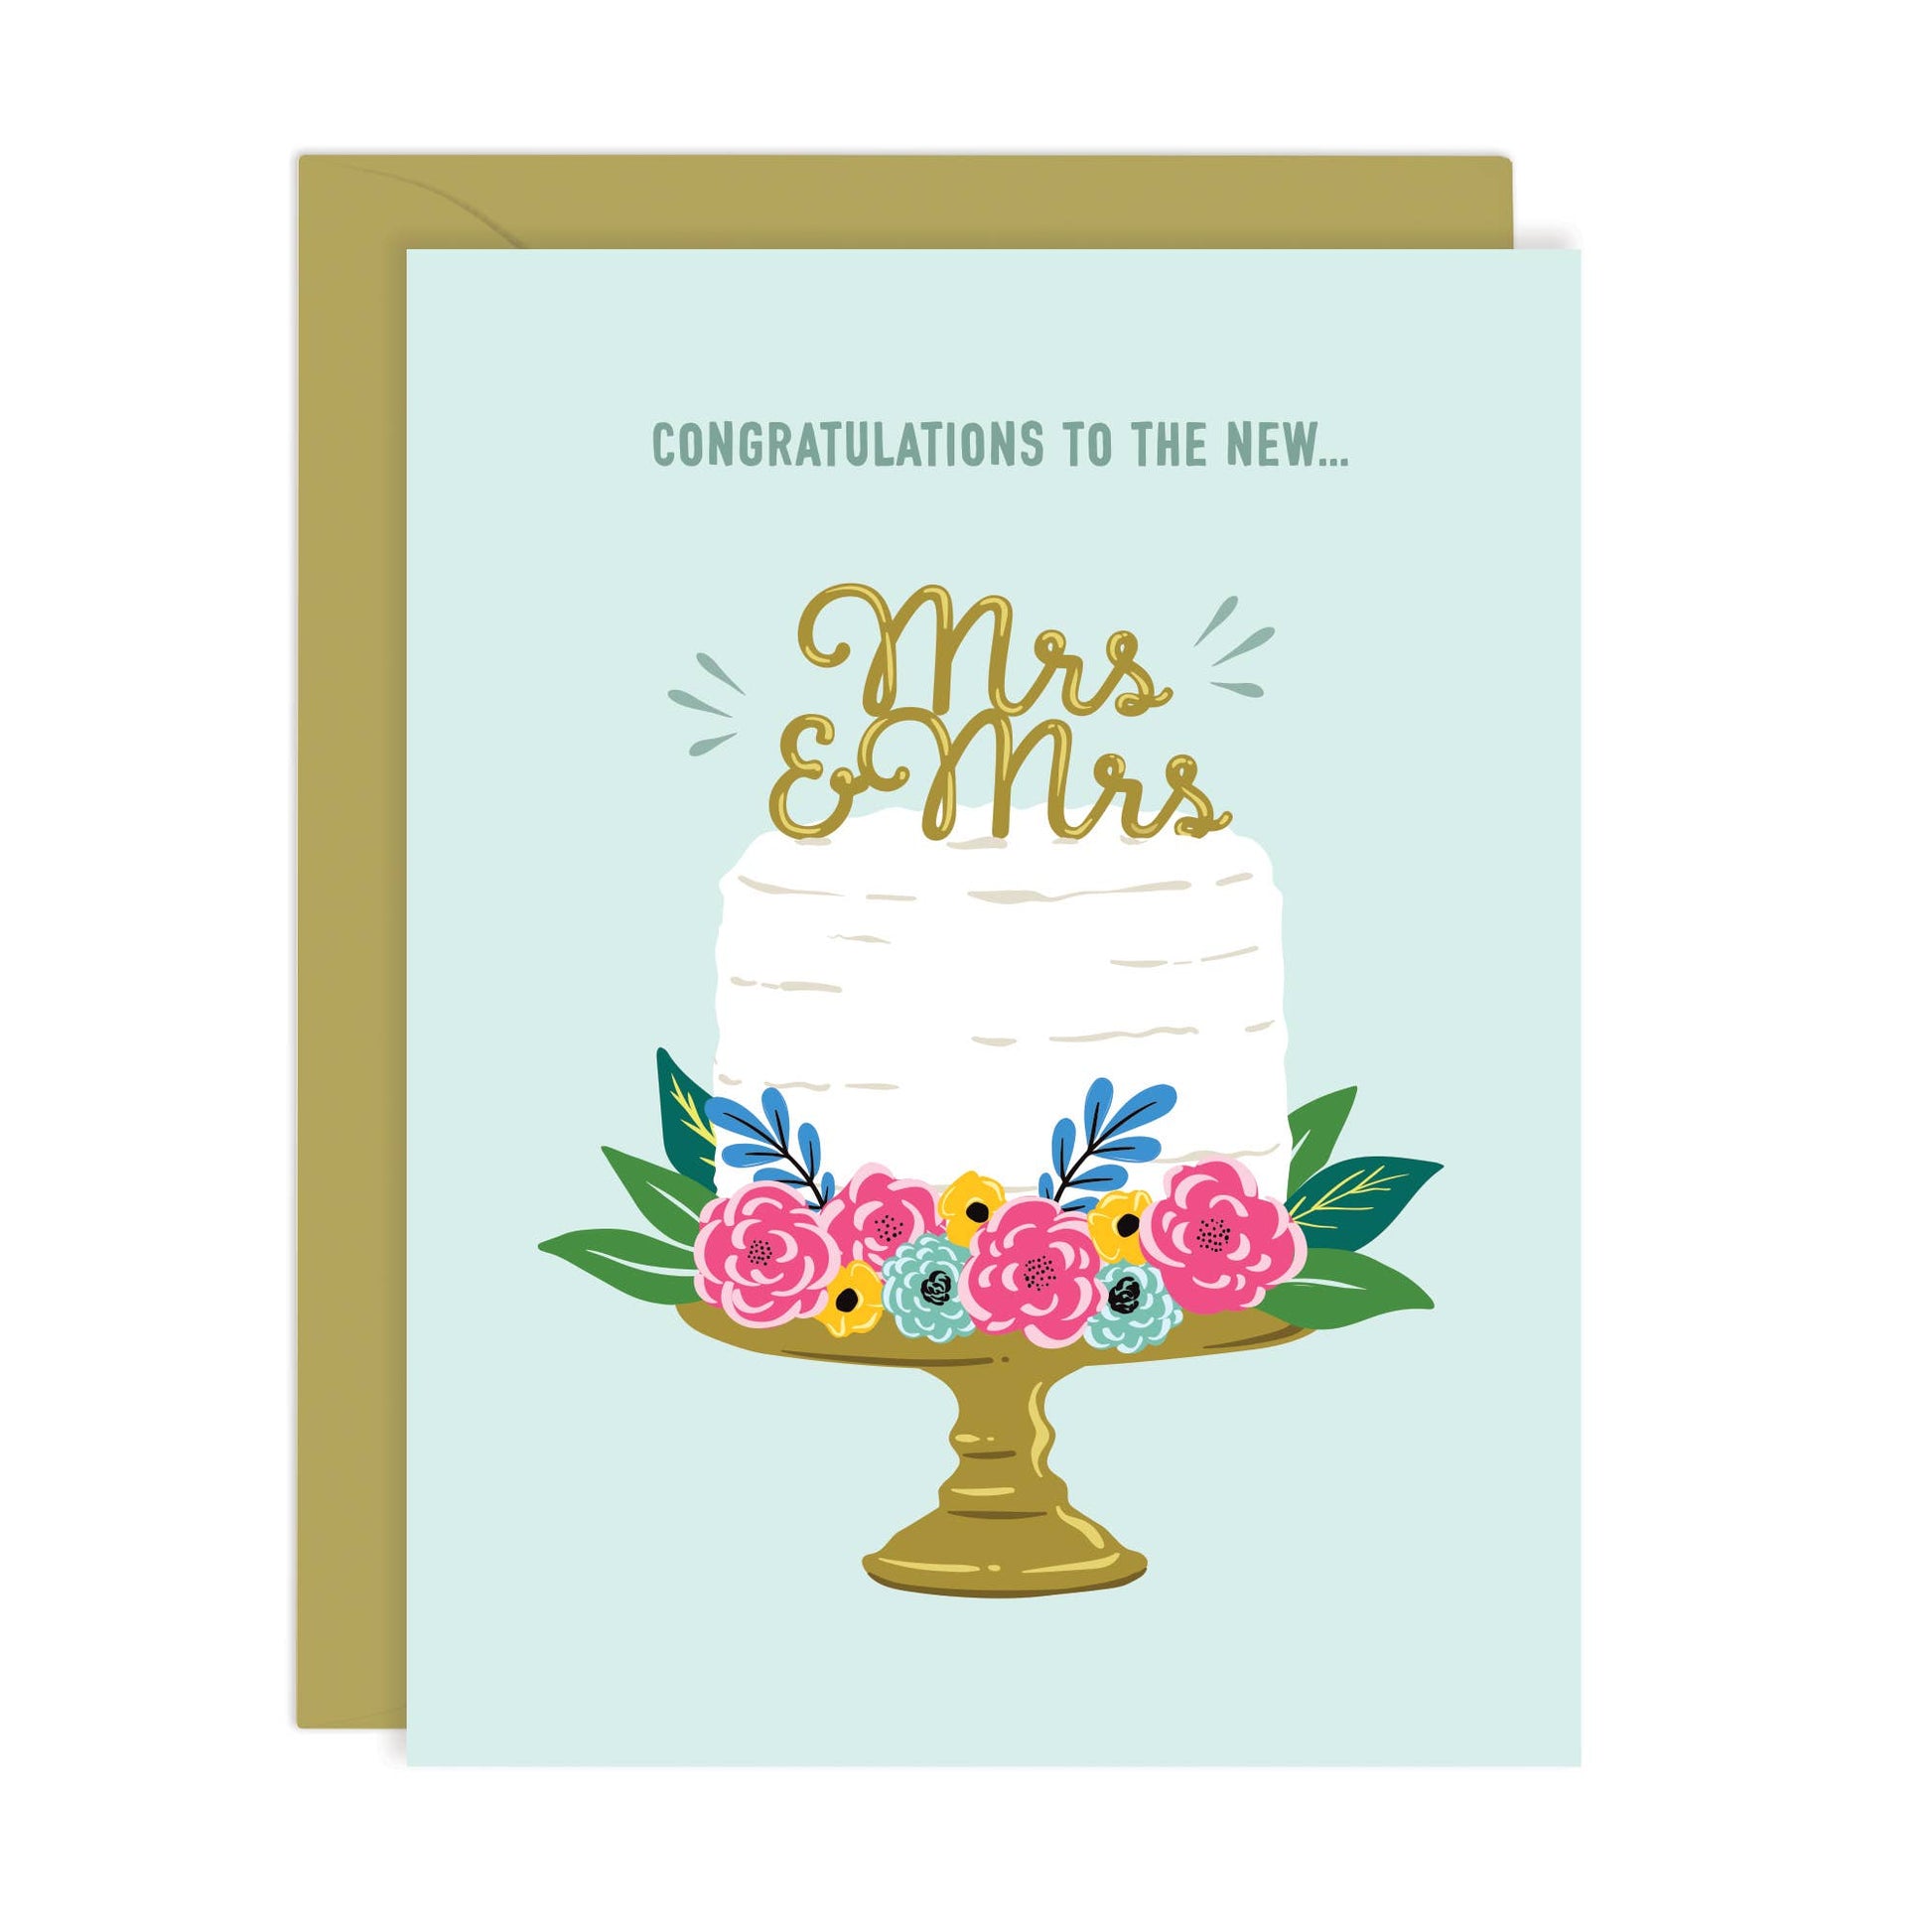 "Congratulations to the new Mrs. & Mrs." Text on pale blue background with an artistic drawing of a white wedding cake and pink, yellow, and blue flowers.